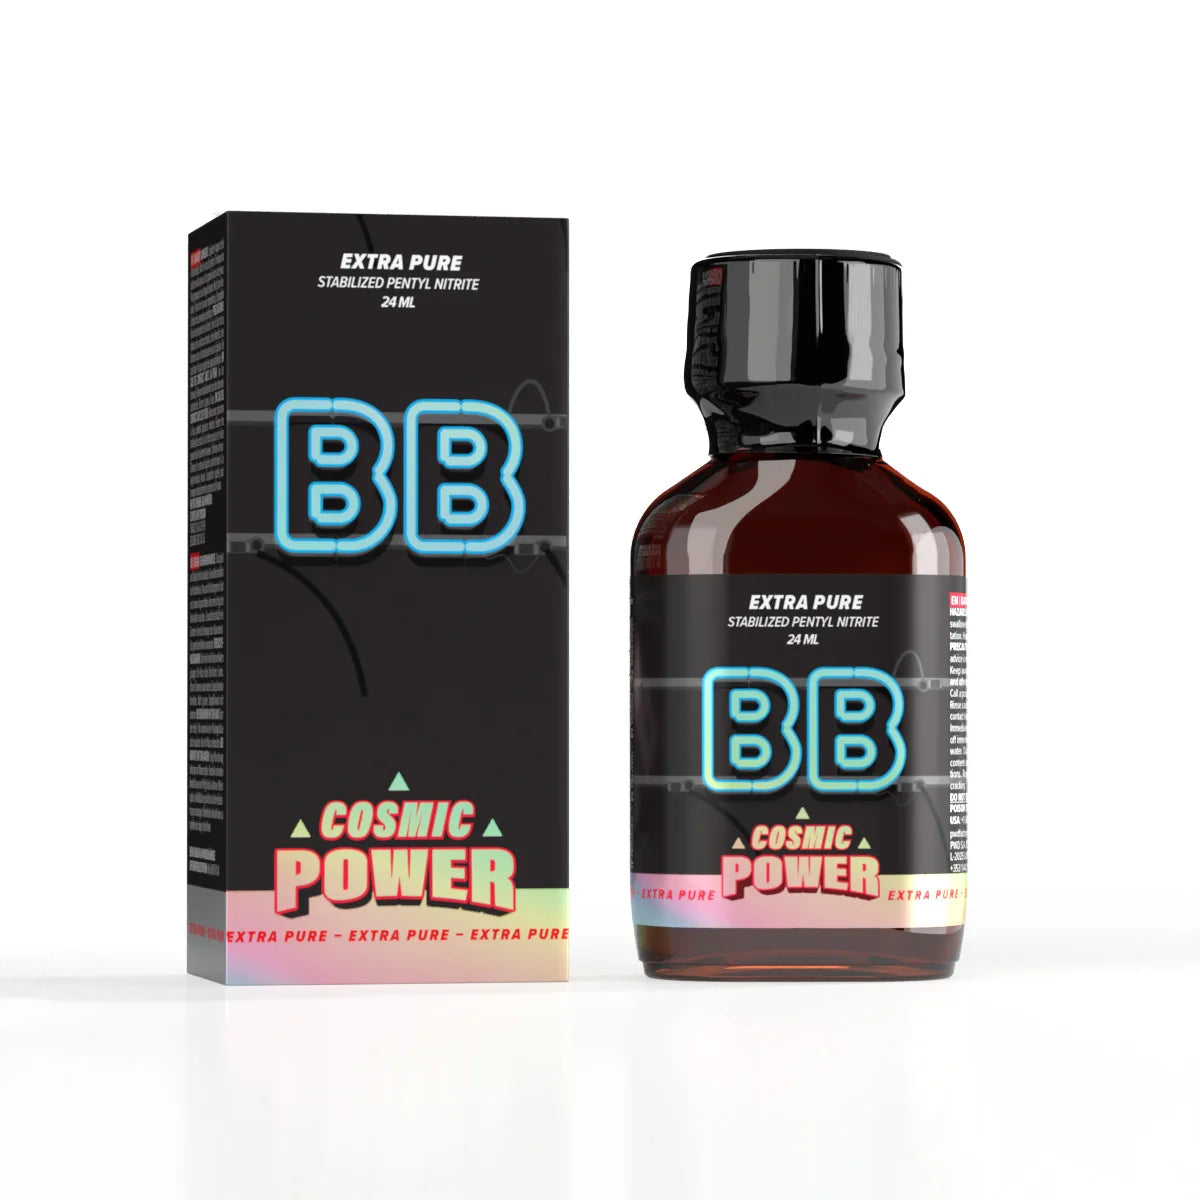 A product photo of a 24ml bottle of BB Cosmic Poppers.